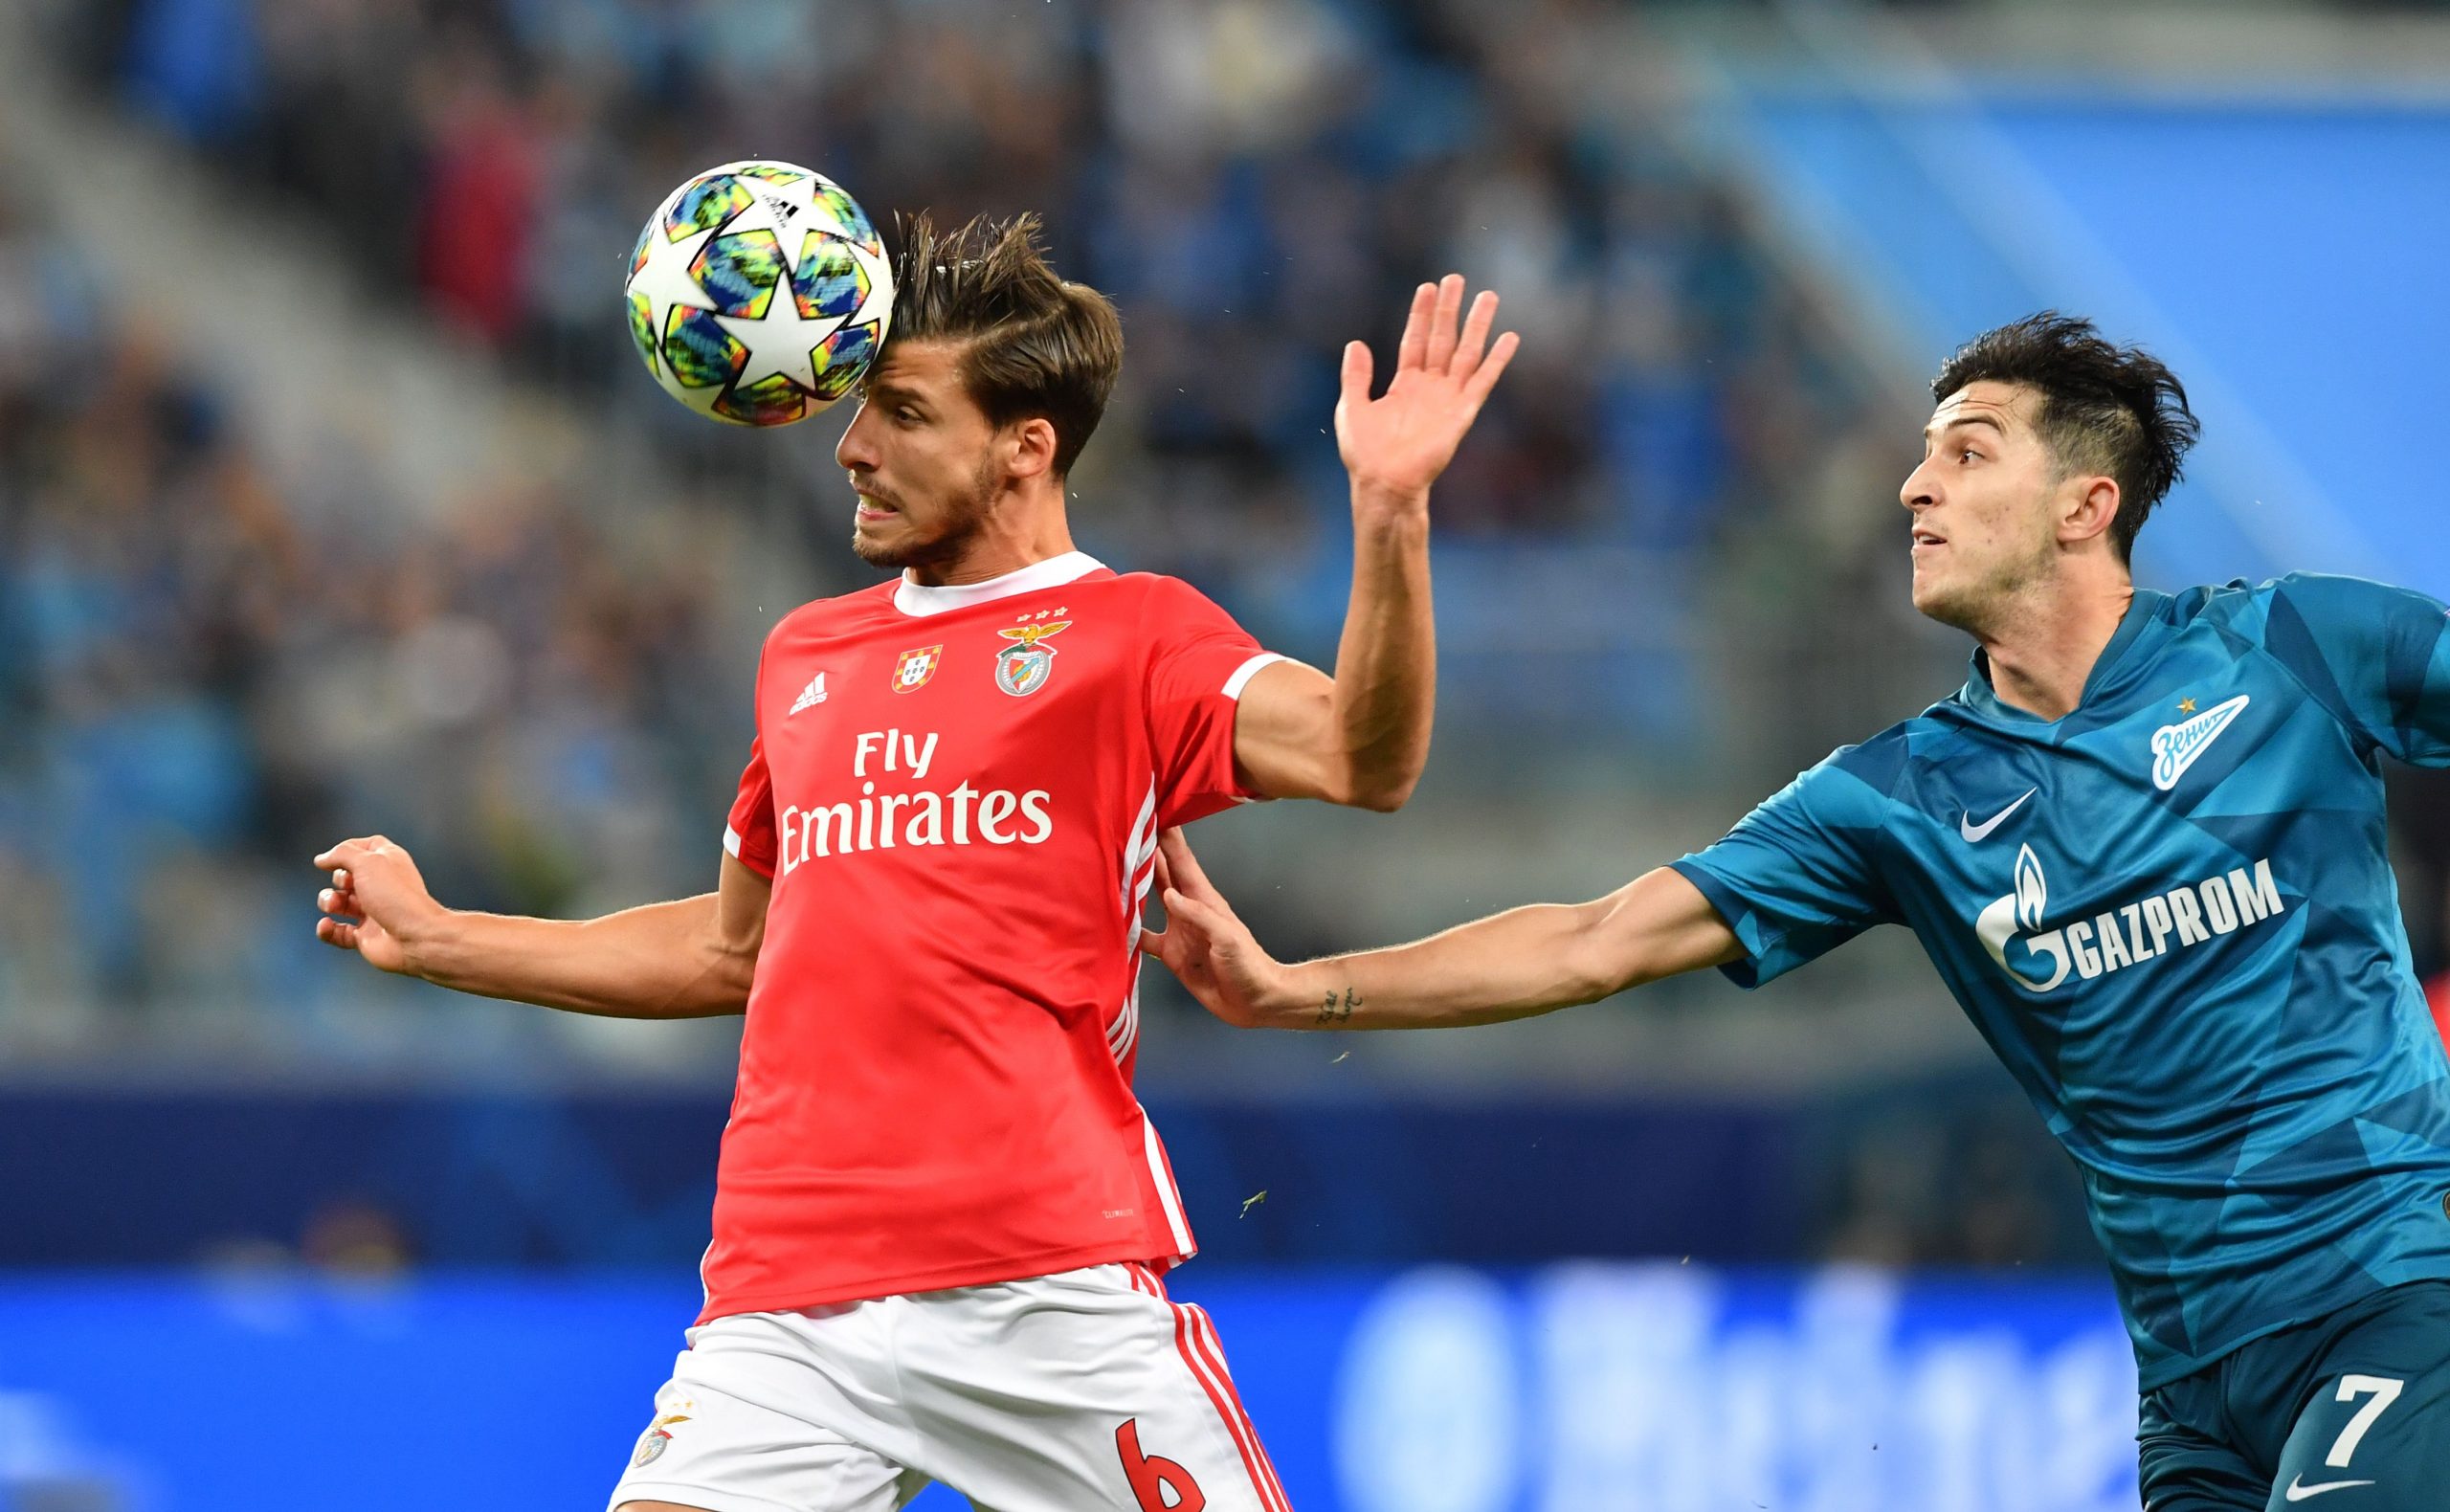 Benfica defender Ruben Dias (left) fights for the ball with Zenit St. Petersburg's Iranian forward Sardar Azmoun during the UEFA Champions League Group G match at the Krestovsky Stadium in Saint Petersburg in October last year. 